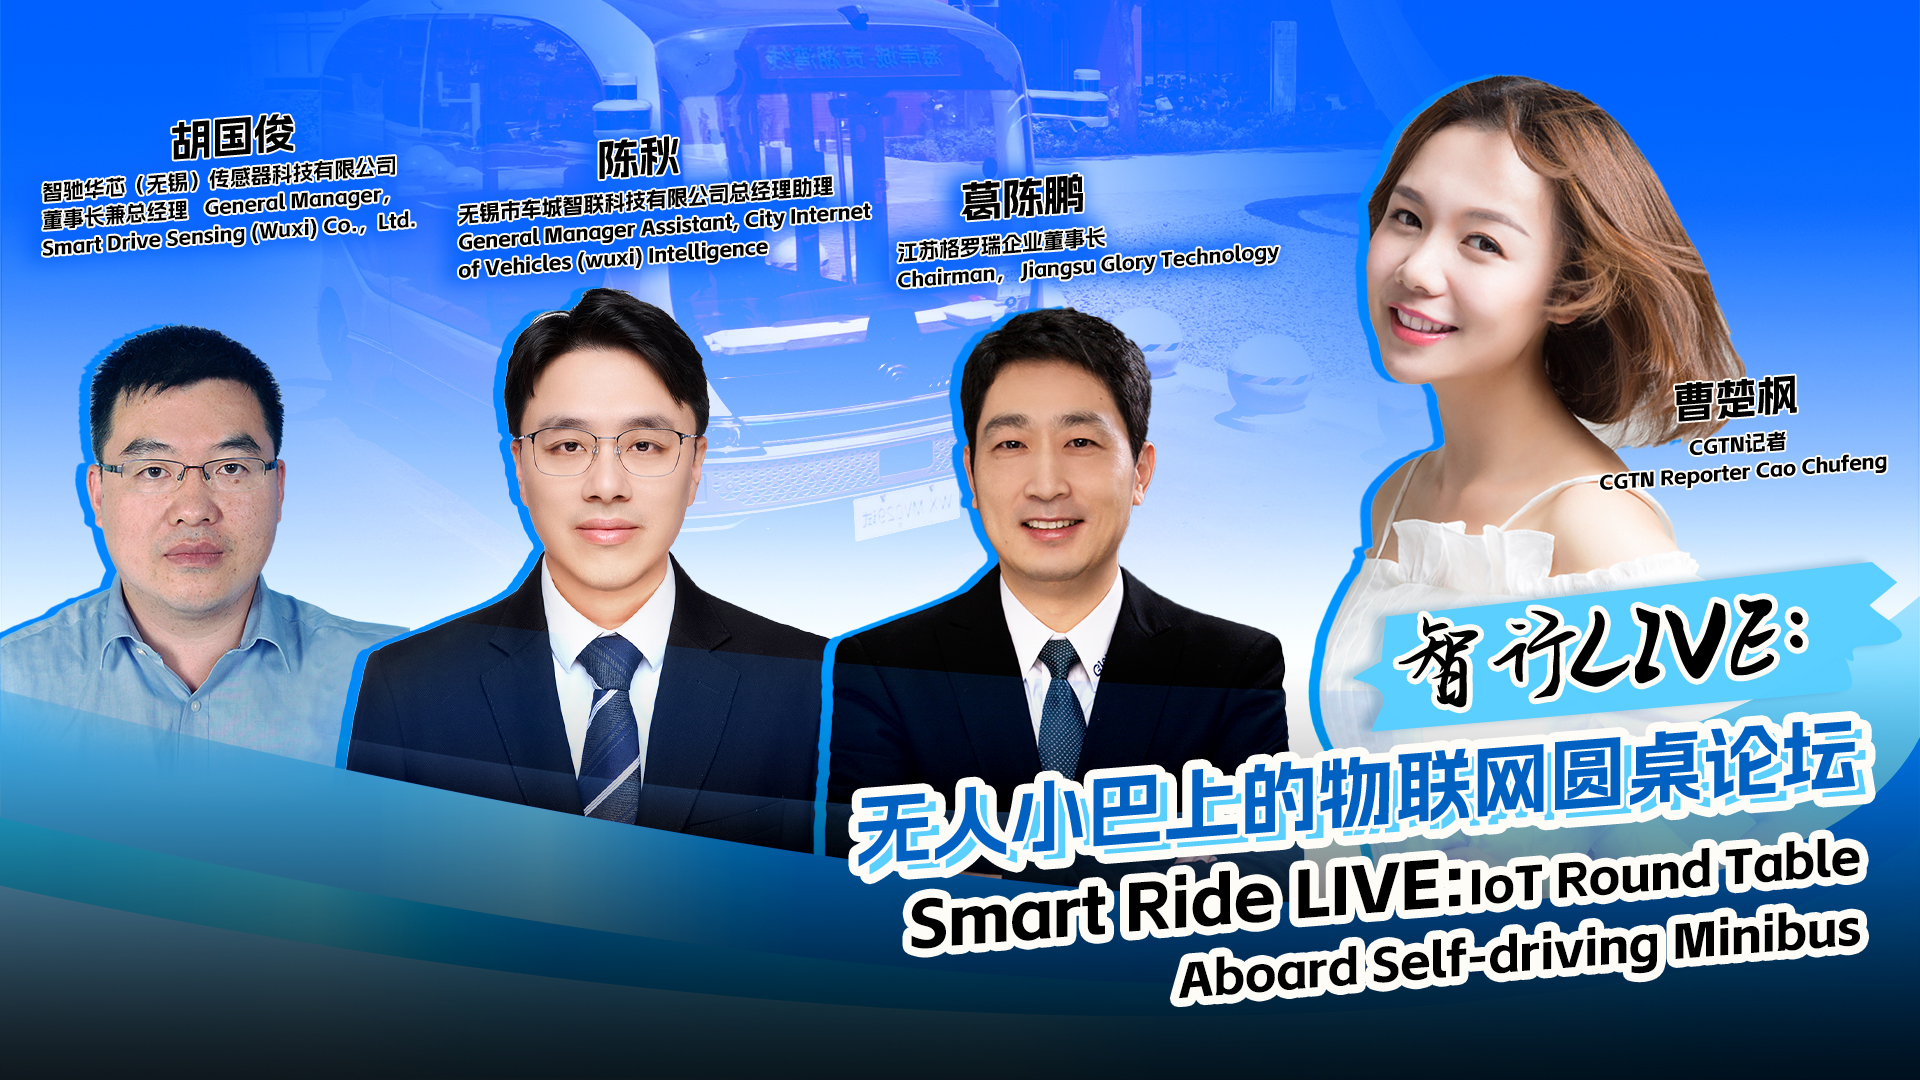 Live: Smart ride LIVE – IoT round table aboard self-driving minibus